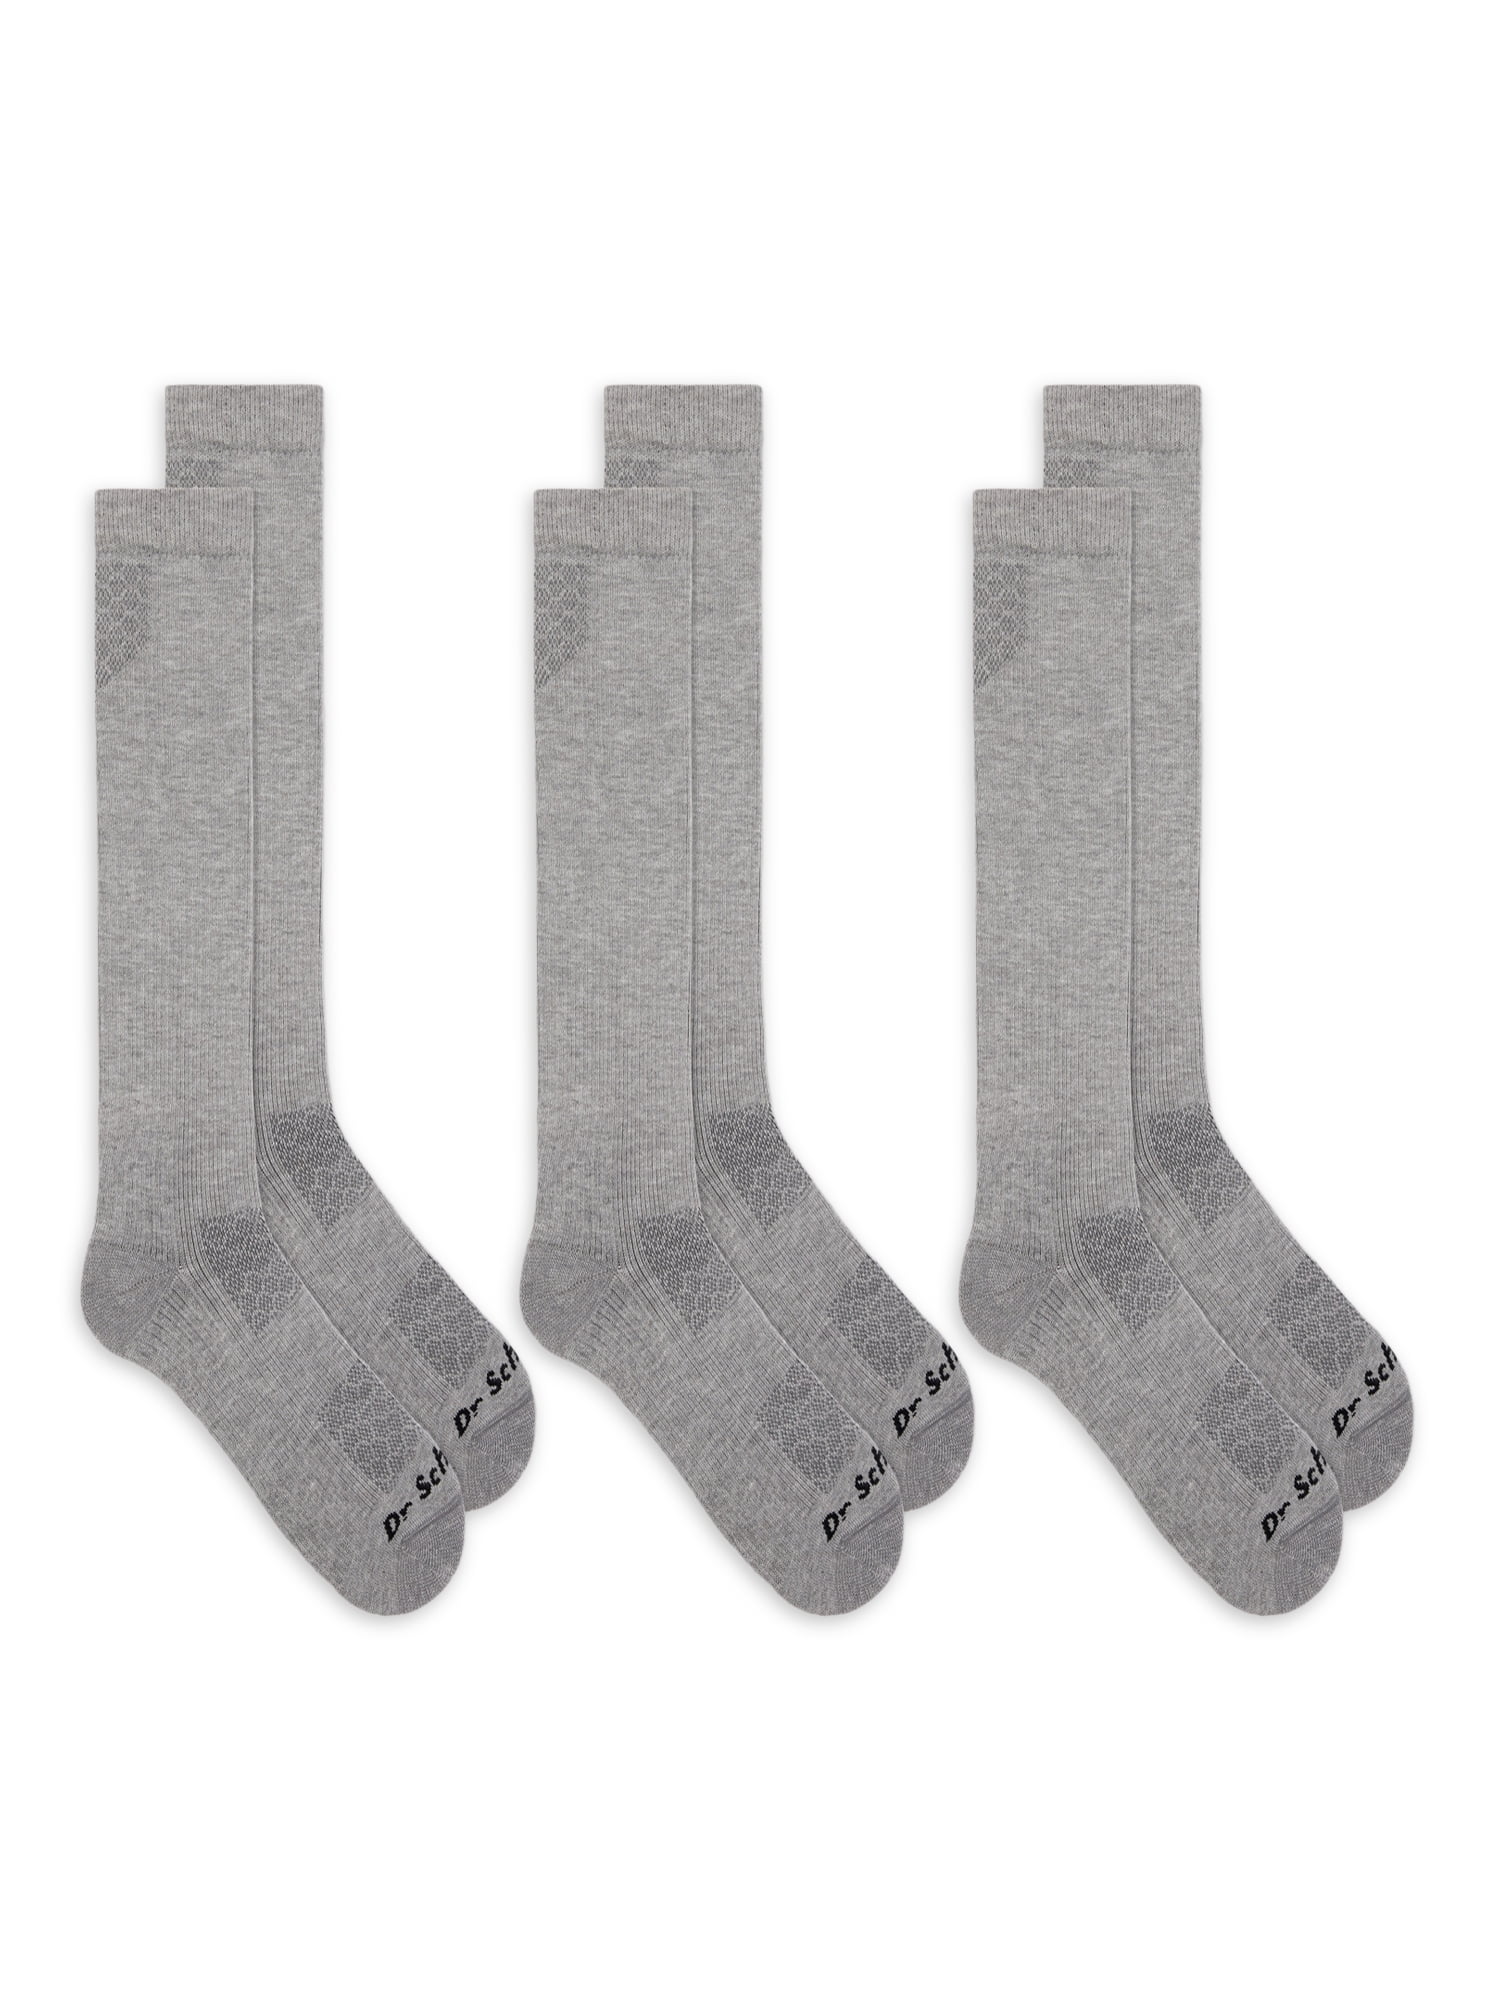 Grip CompressionSocks Academy Pro Size 4-8 One Pair 